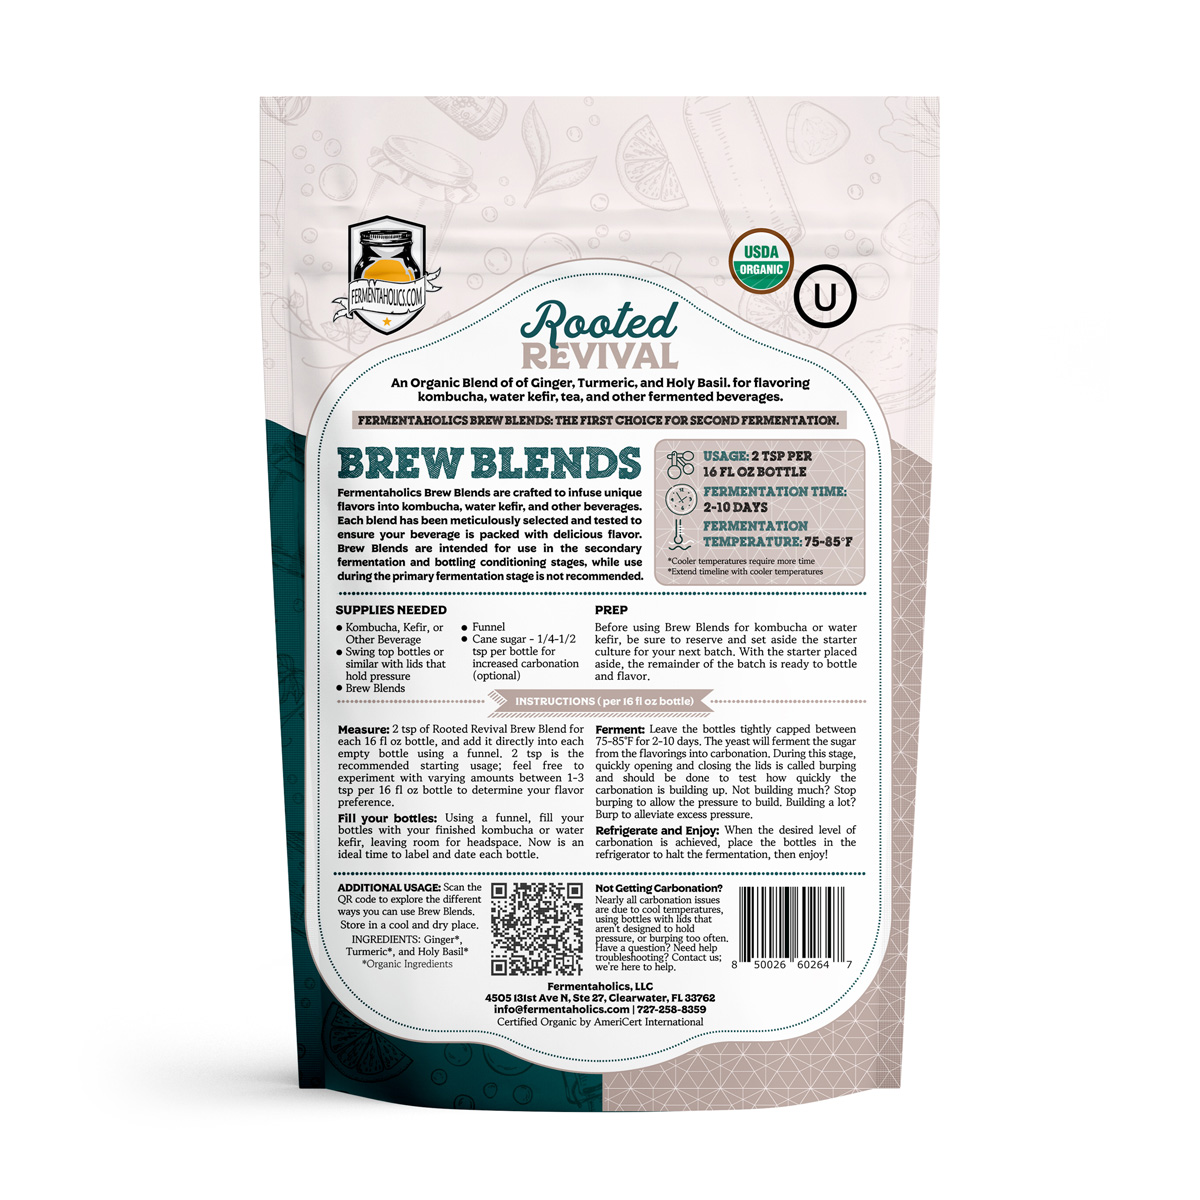 Rooted Revival Brew Blends